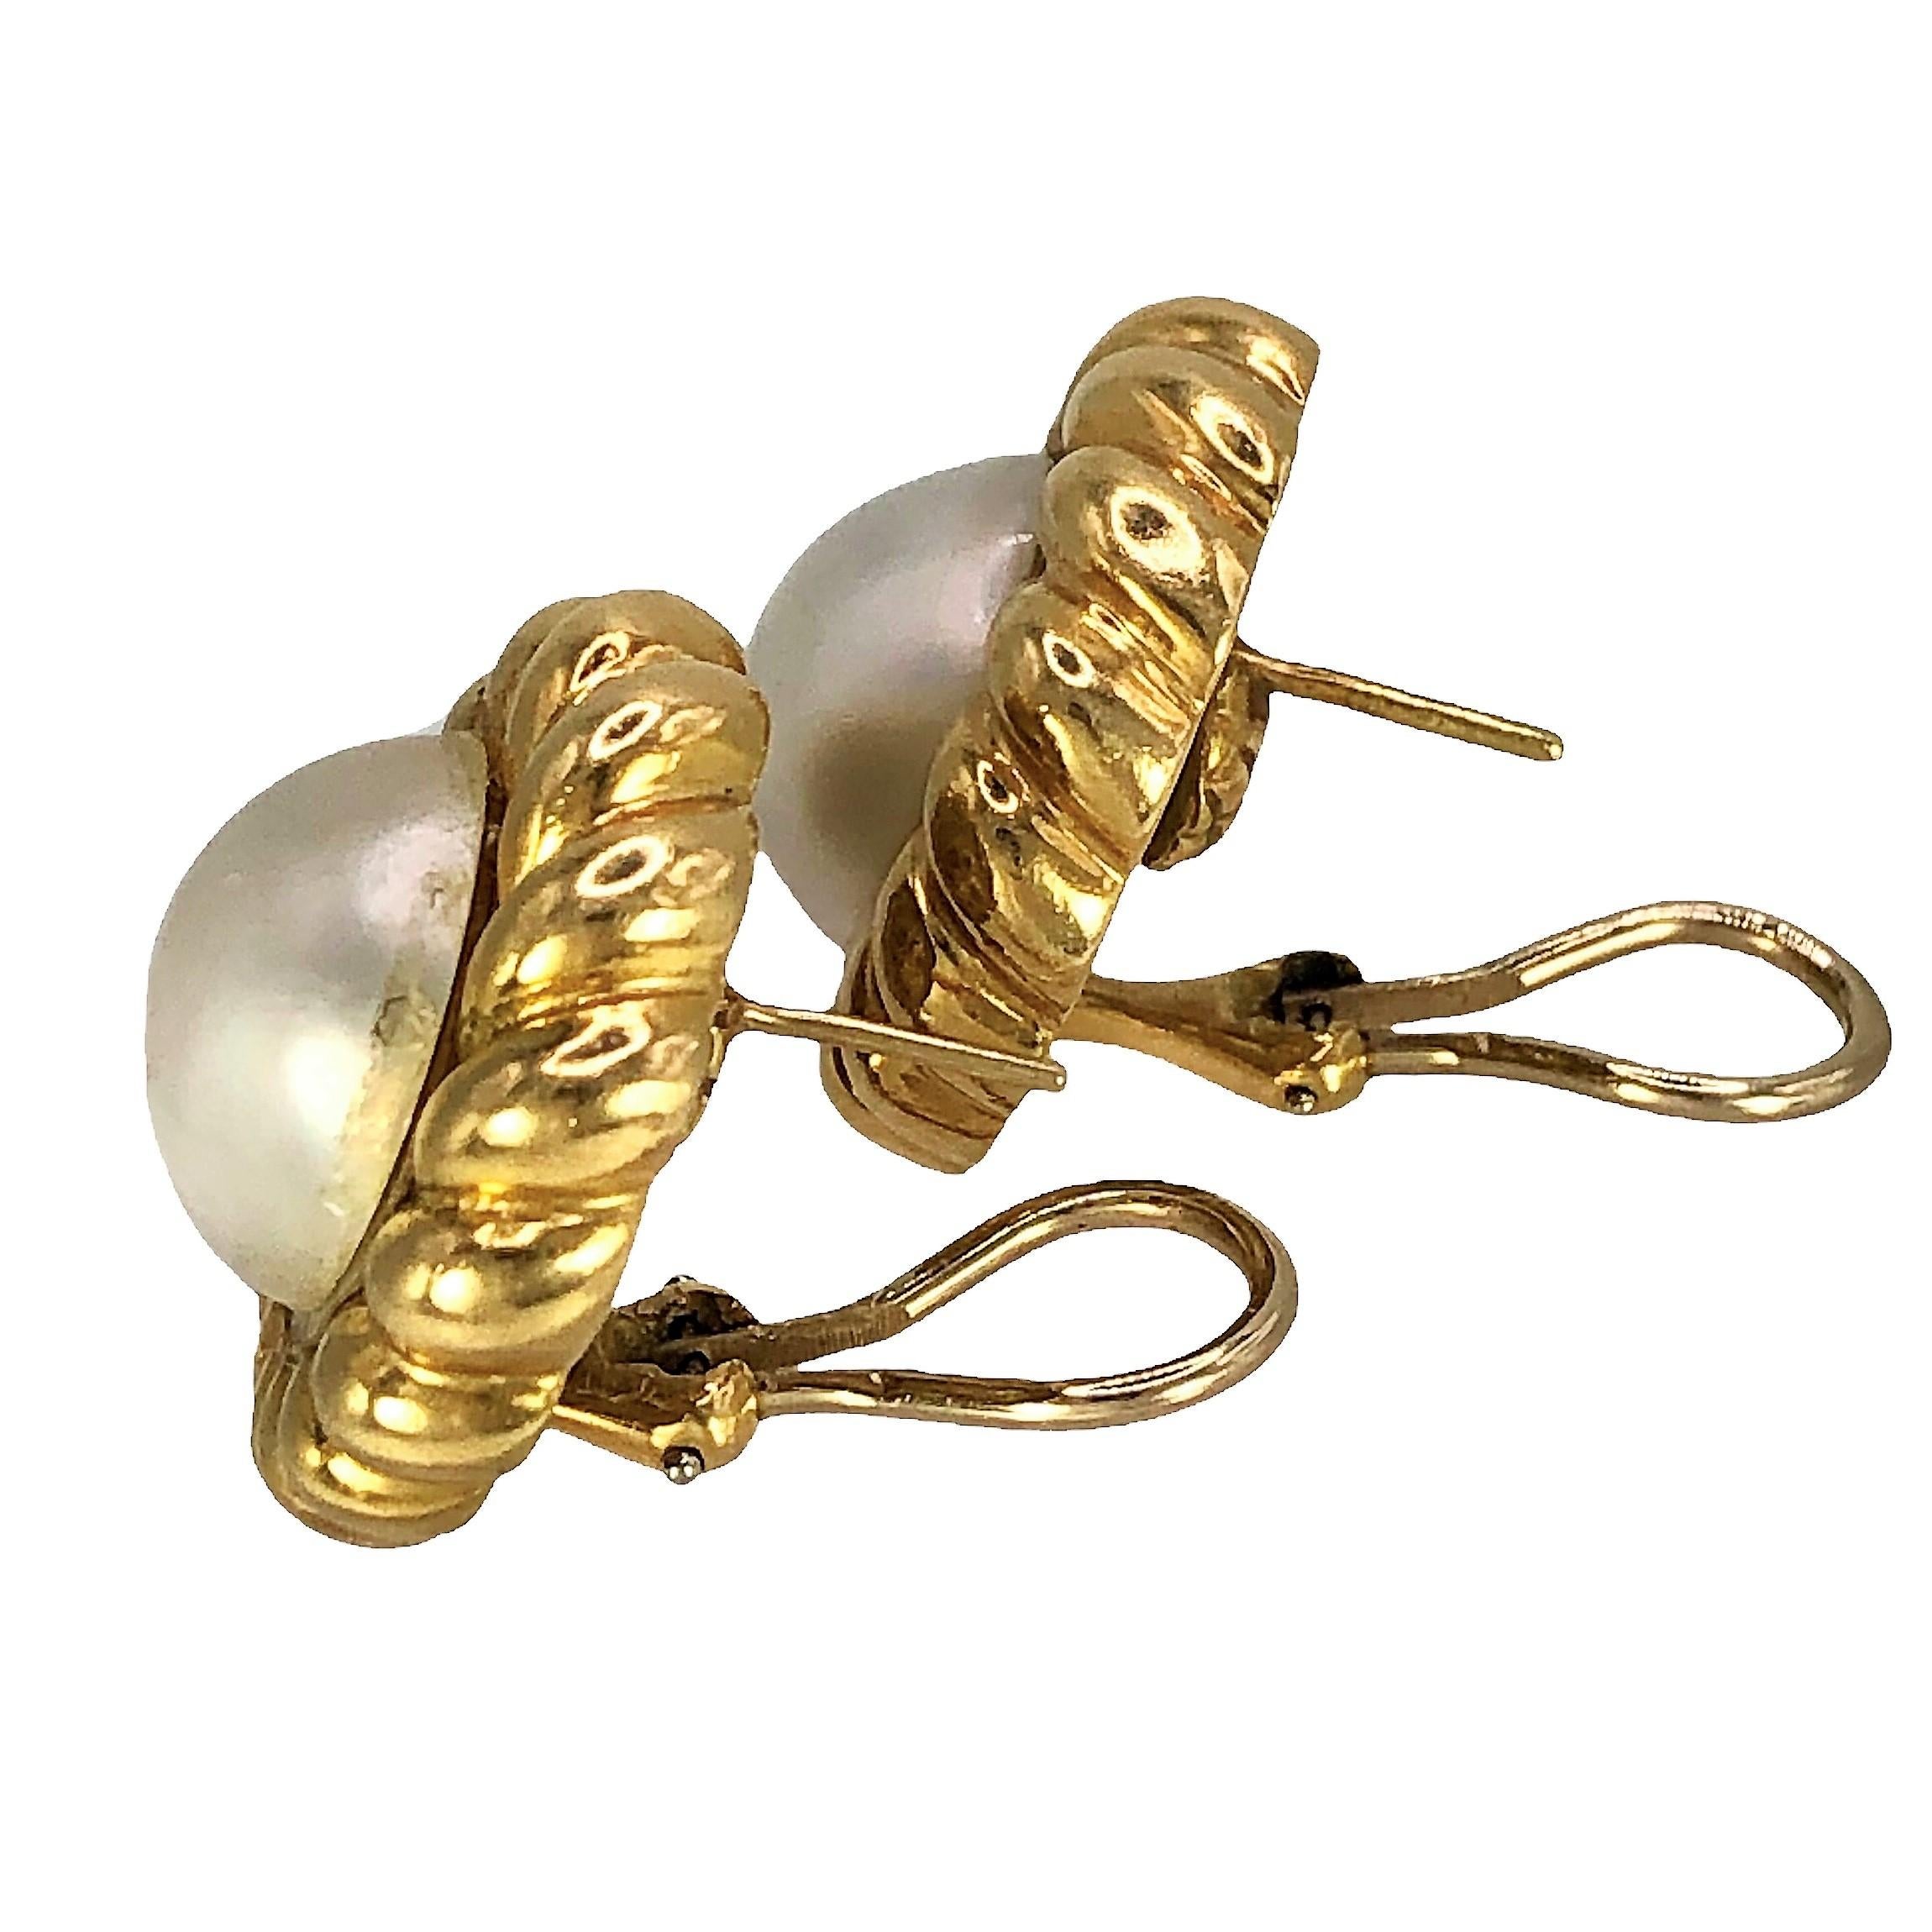 Women's 1987 Tiffany & Co. 18K Yellow Gold Twisted Rope Earrings with Mabe Pearl Centers